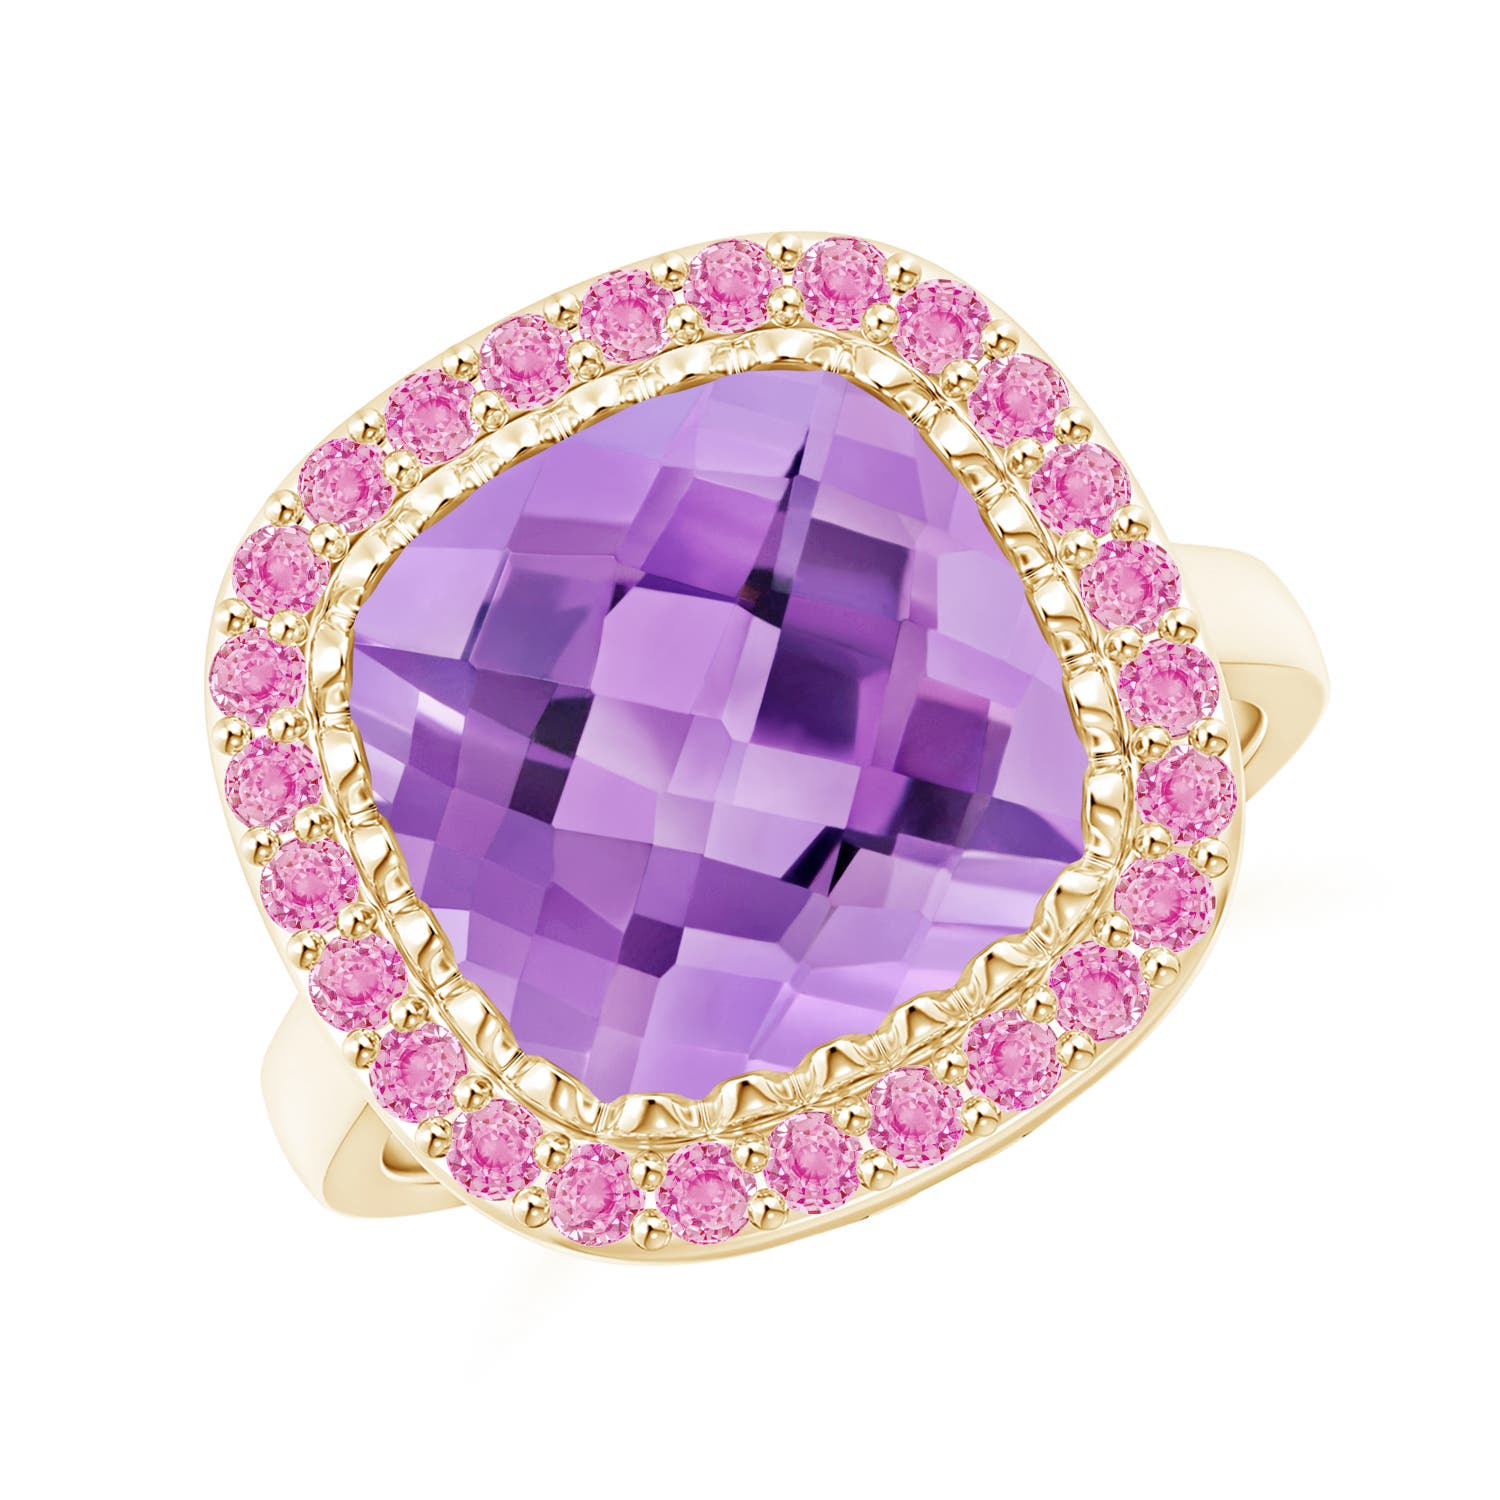 A - Amethyst / 5.4 CT / 14 KT Yellow Gold